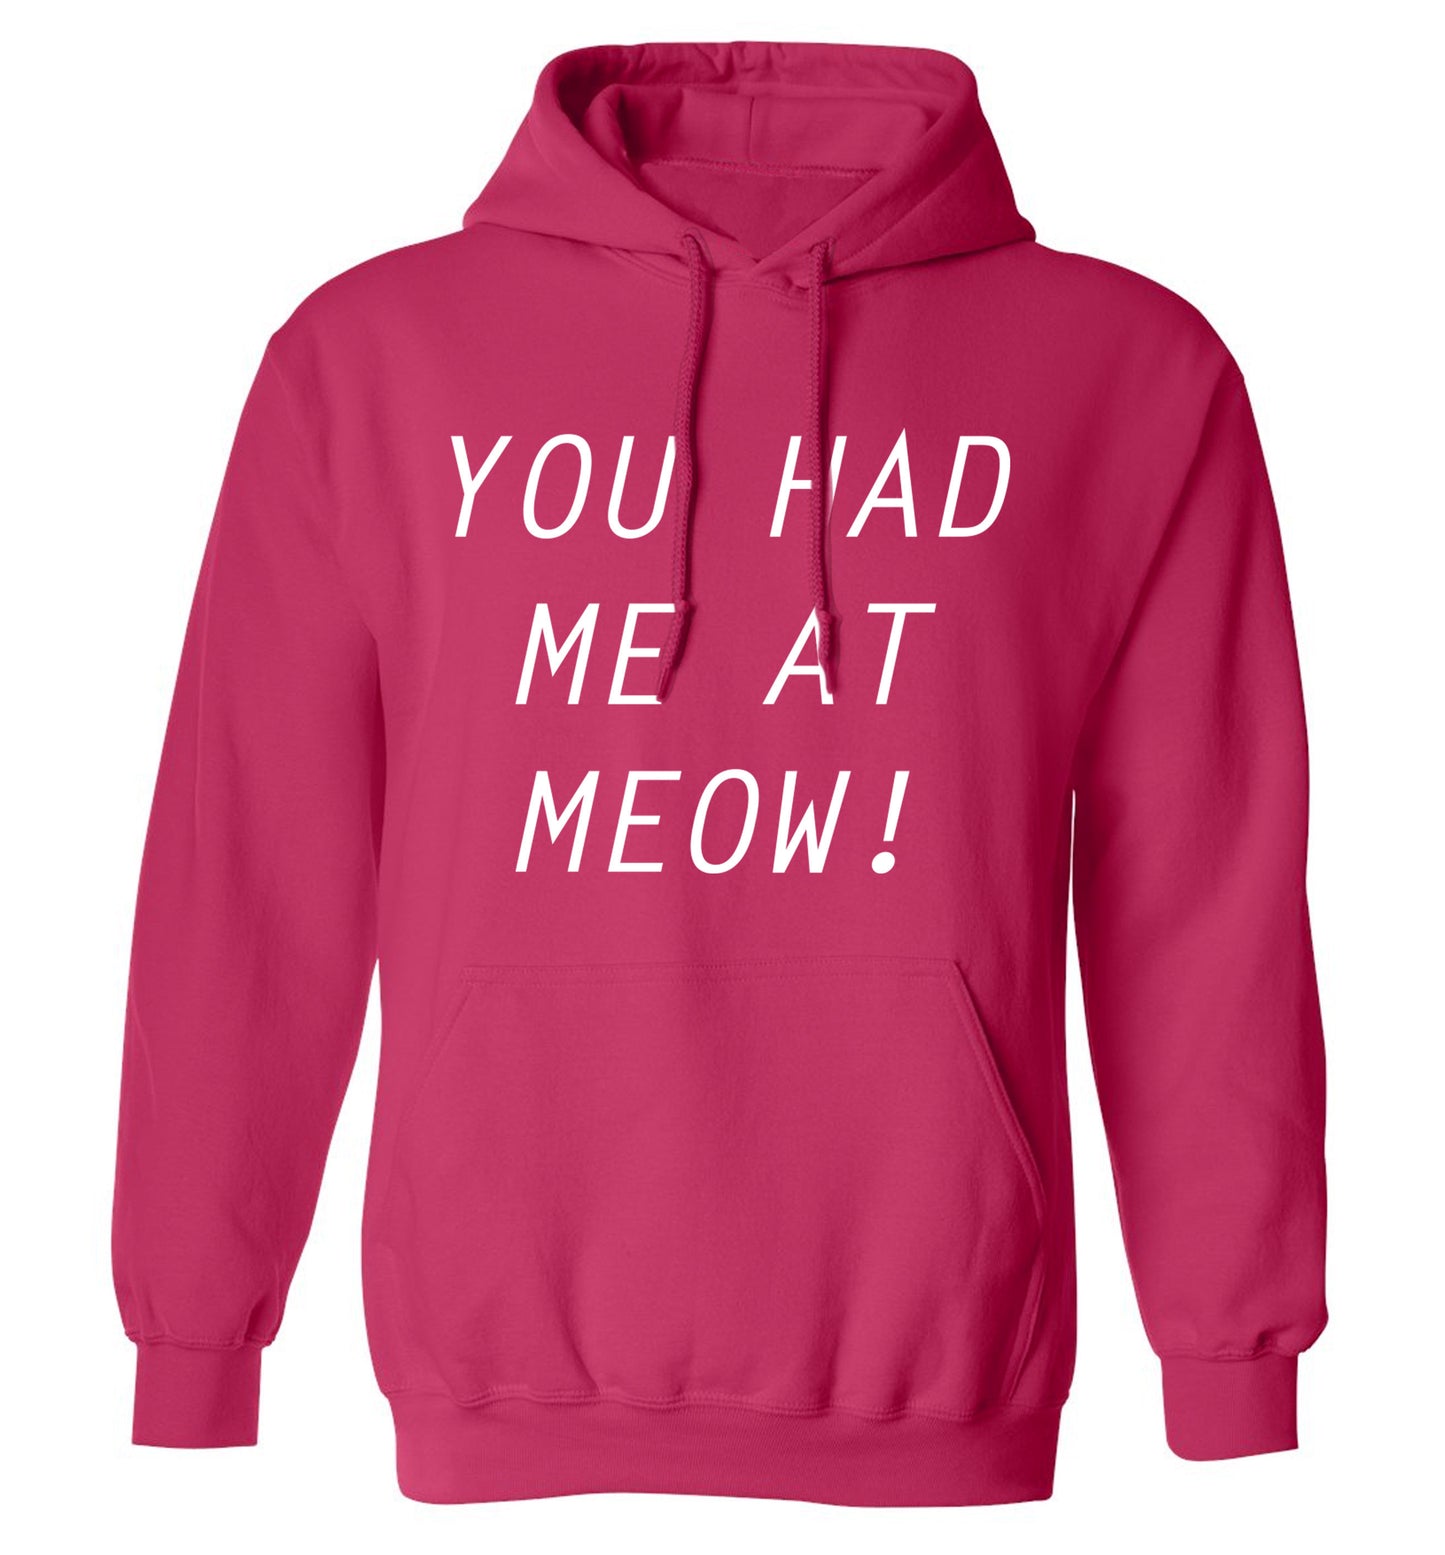 You had me at meow adults unisex pink hoodie 2XL